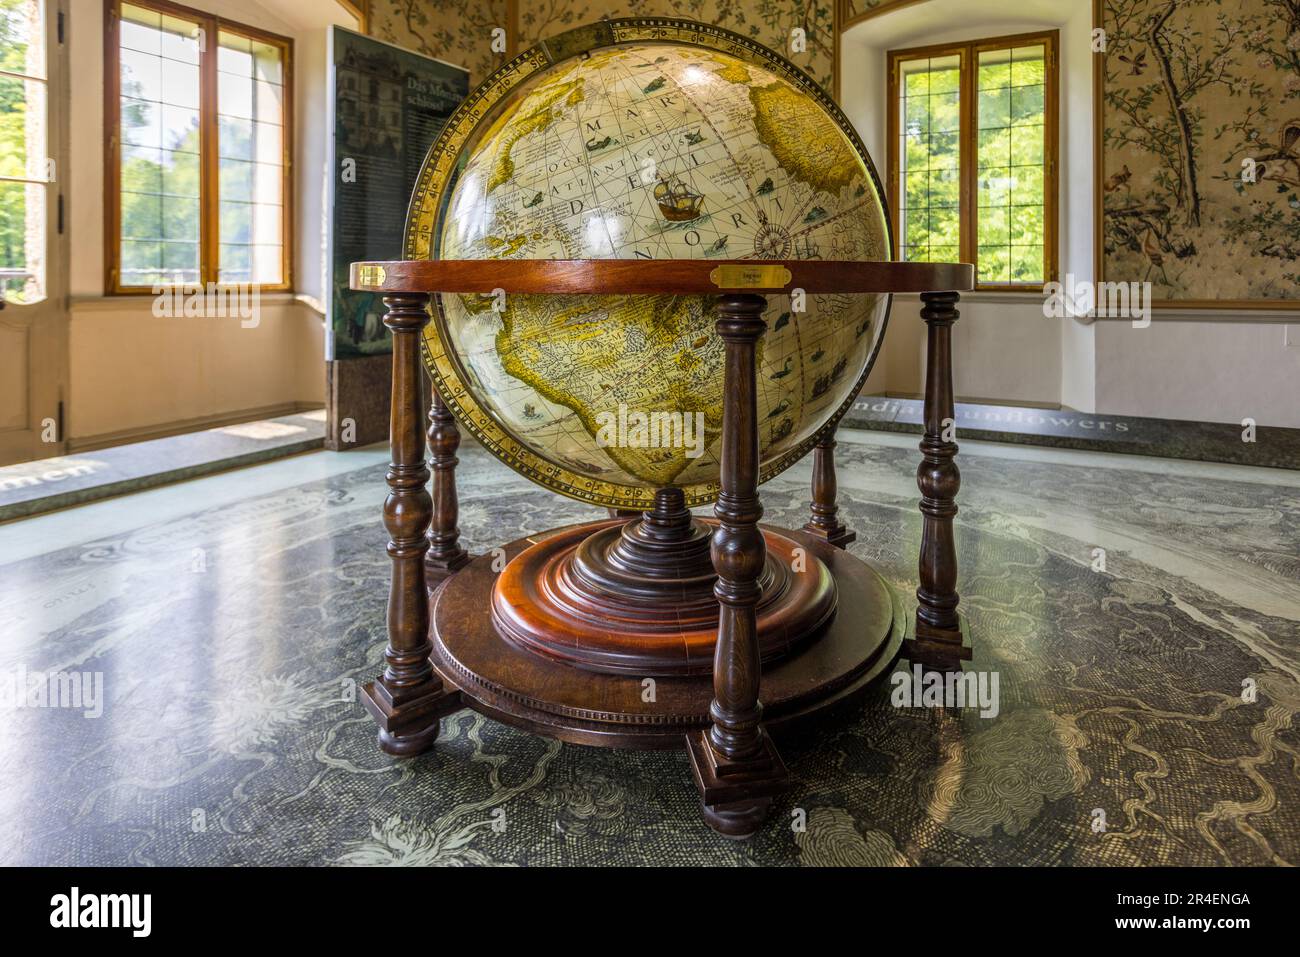 Replica of a historical globe from 1613 in the museum of Hellbrunn Palace in Salzburg, Austria Stock Photo